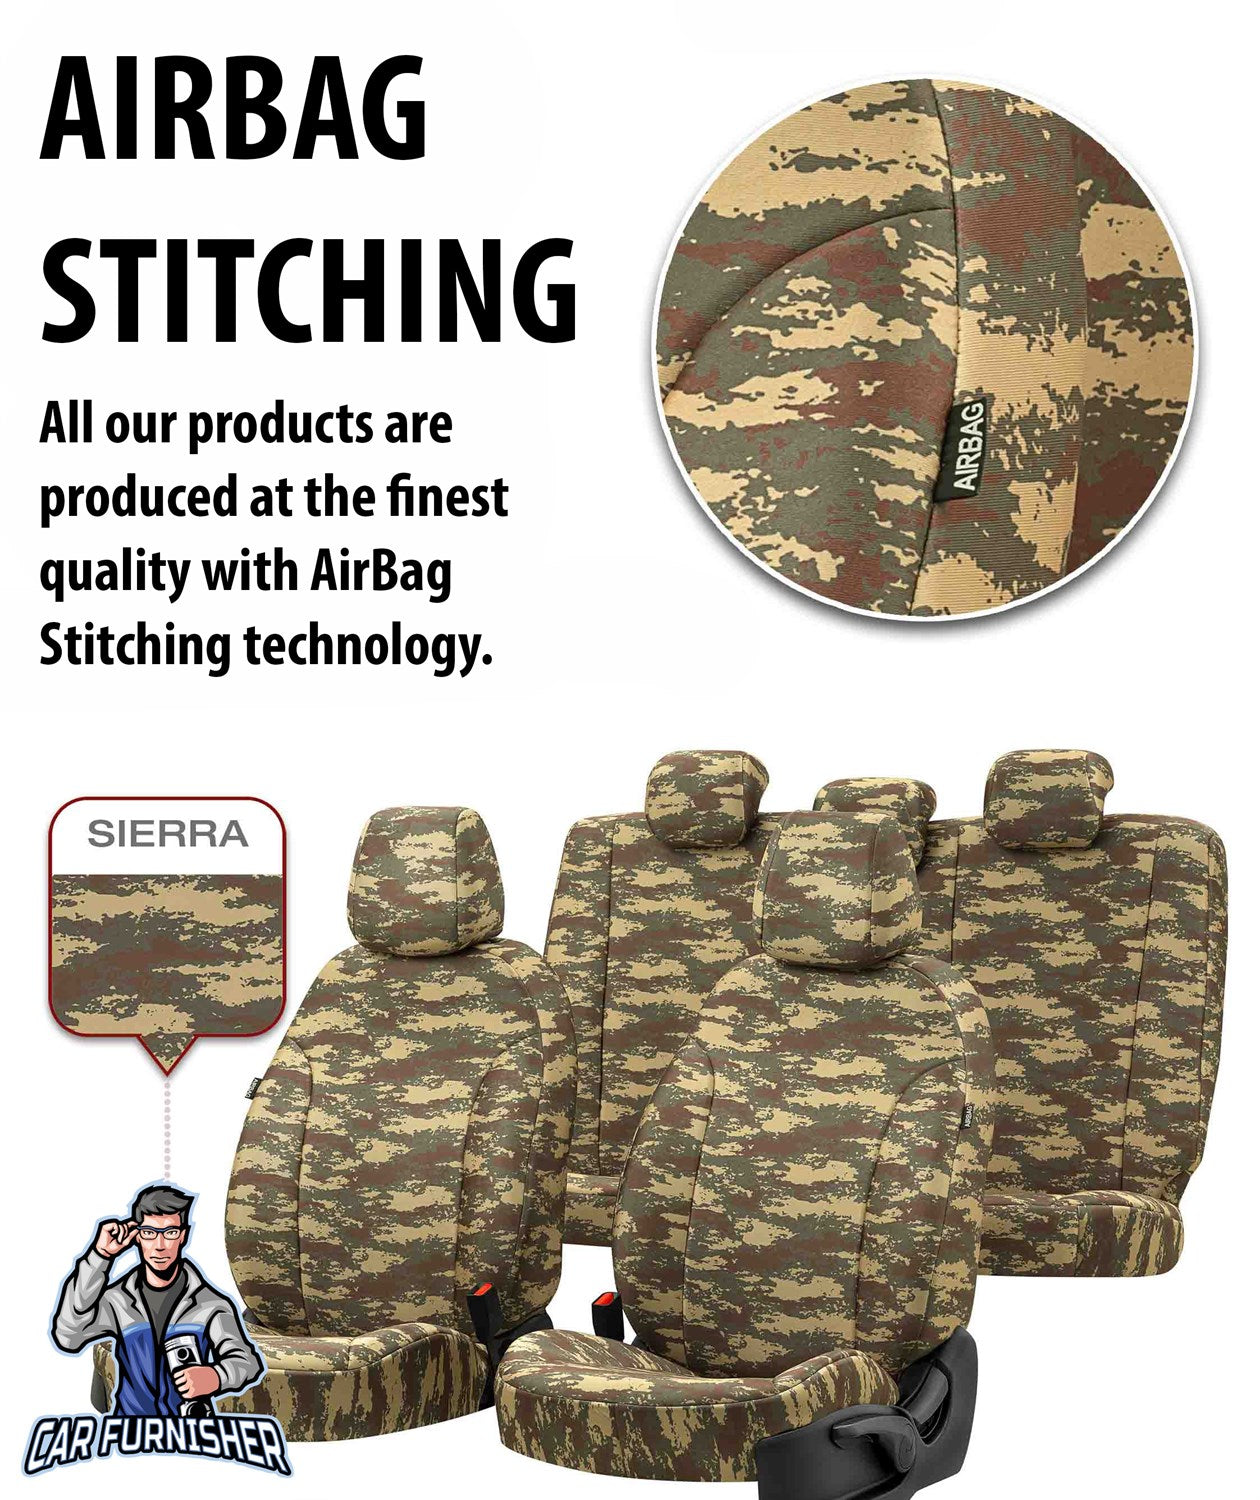 Fiat Ducato Seat Covers Camouflage Waterproof Design Montblanc Camo Waterproof Fabric